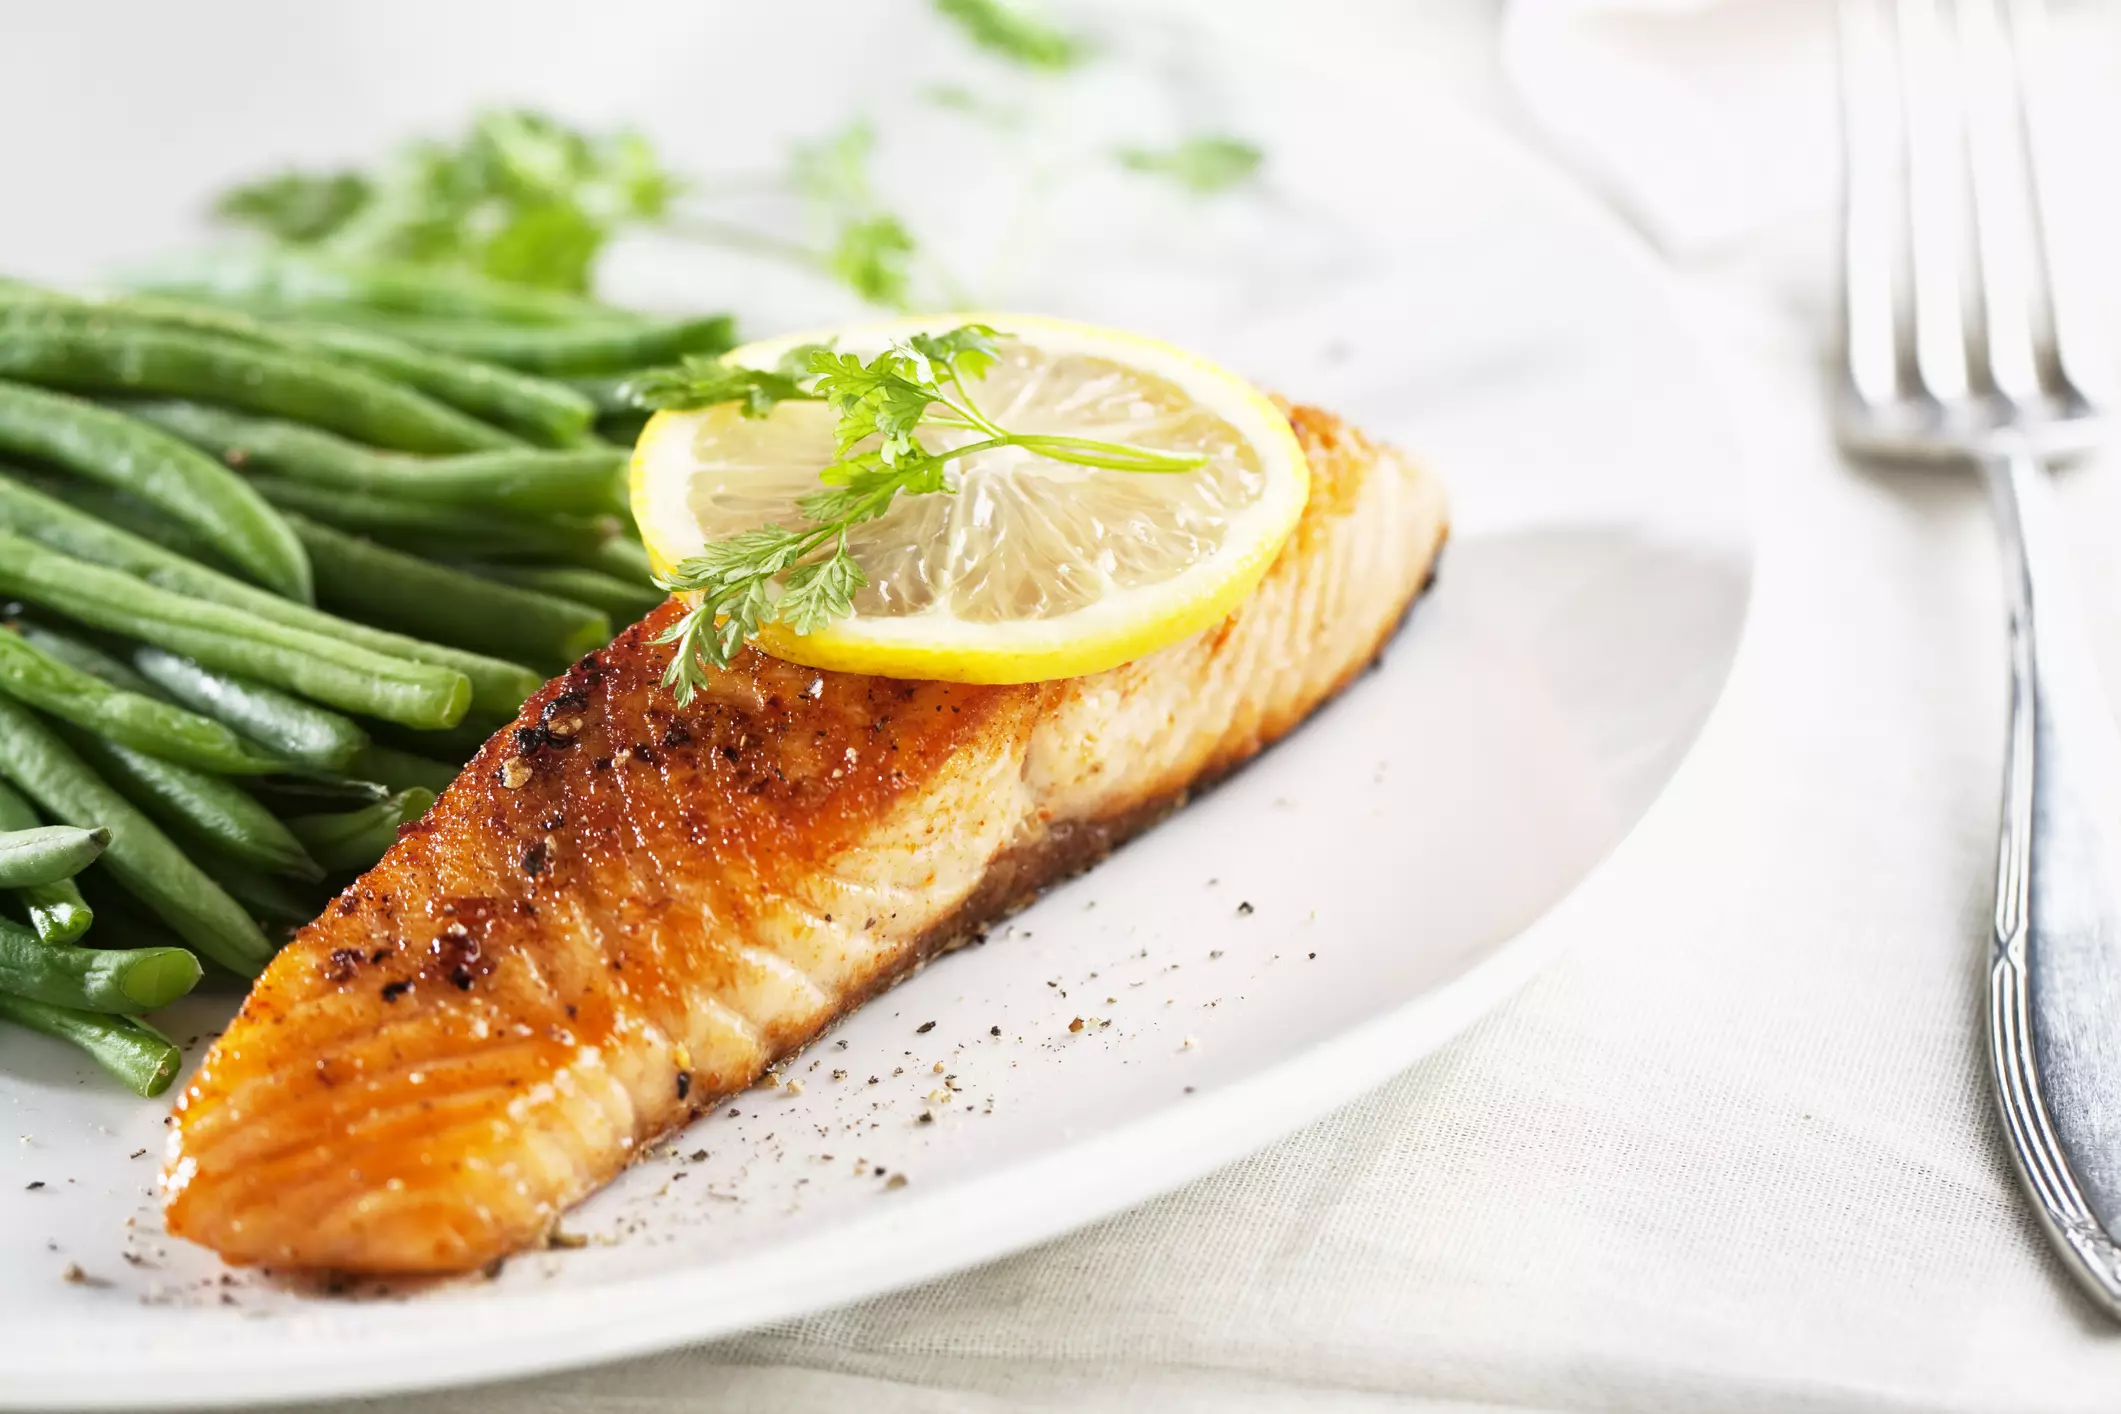 Seared salmon served with green beans